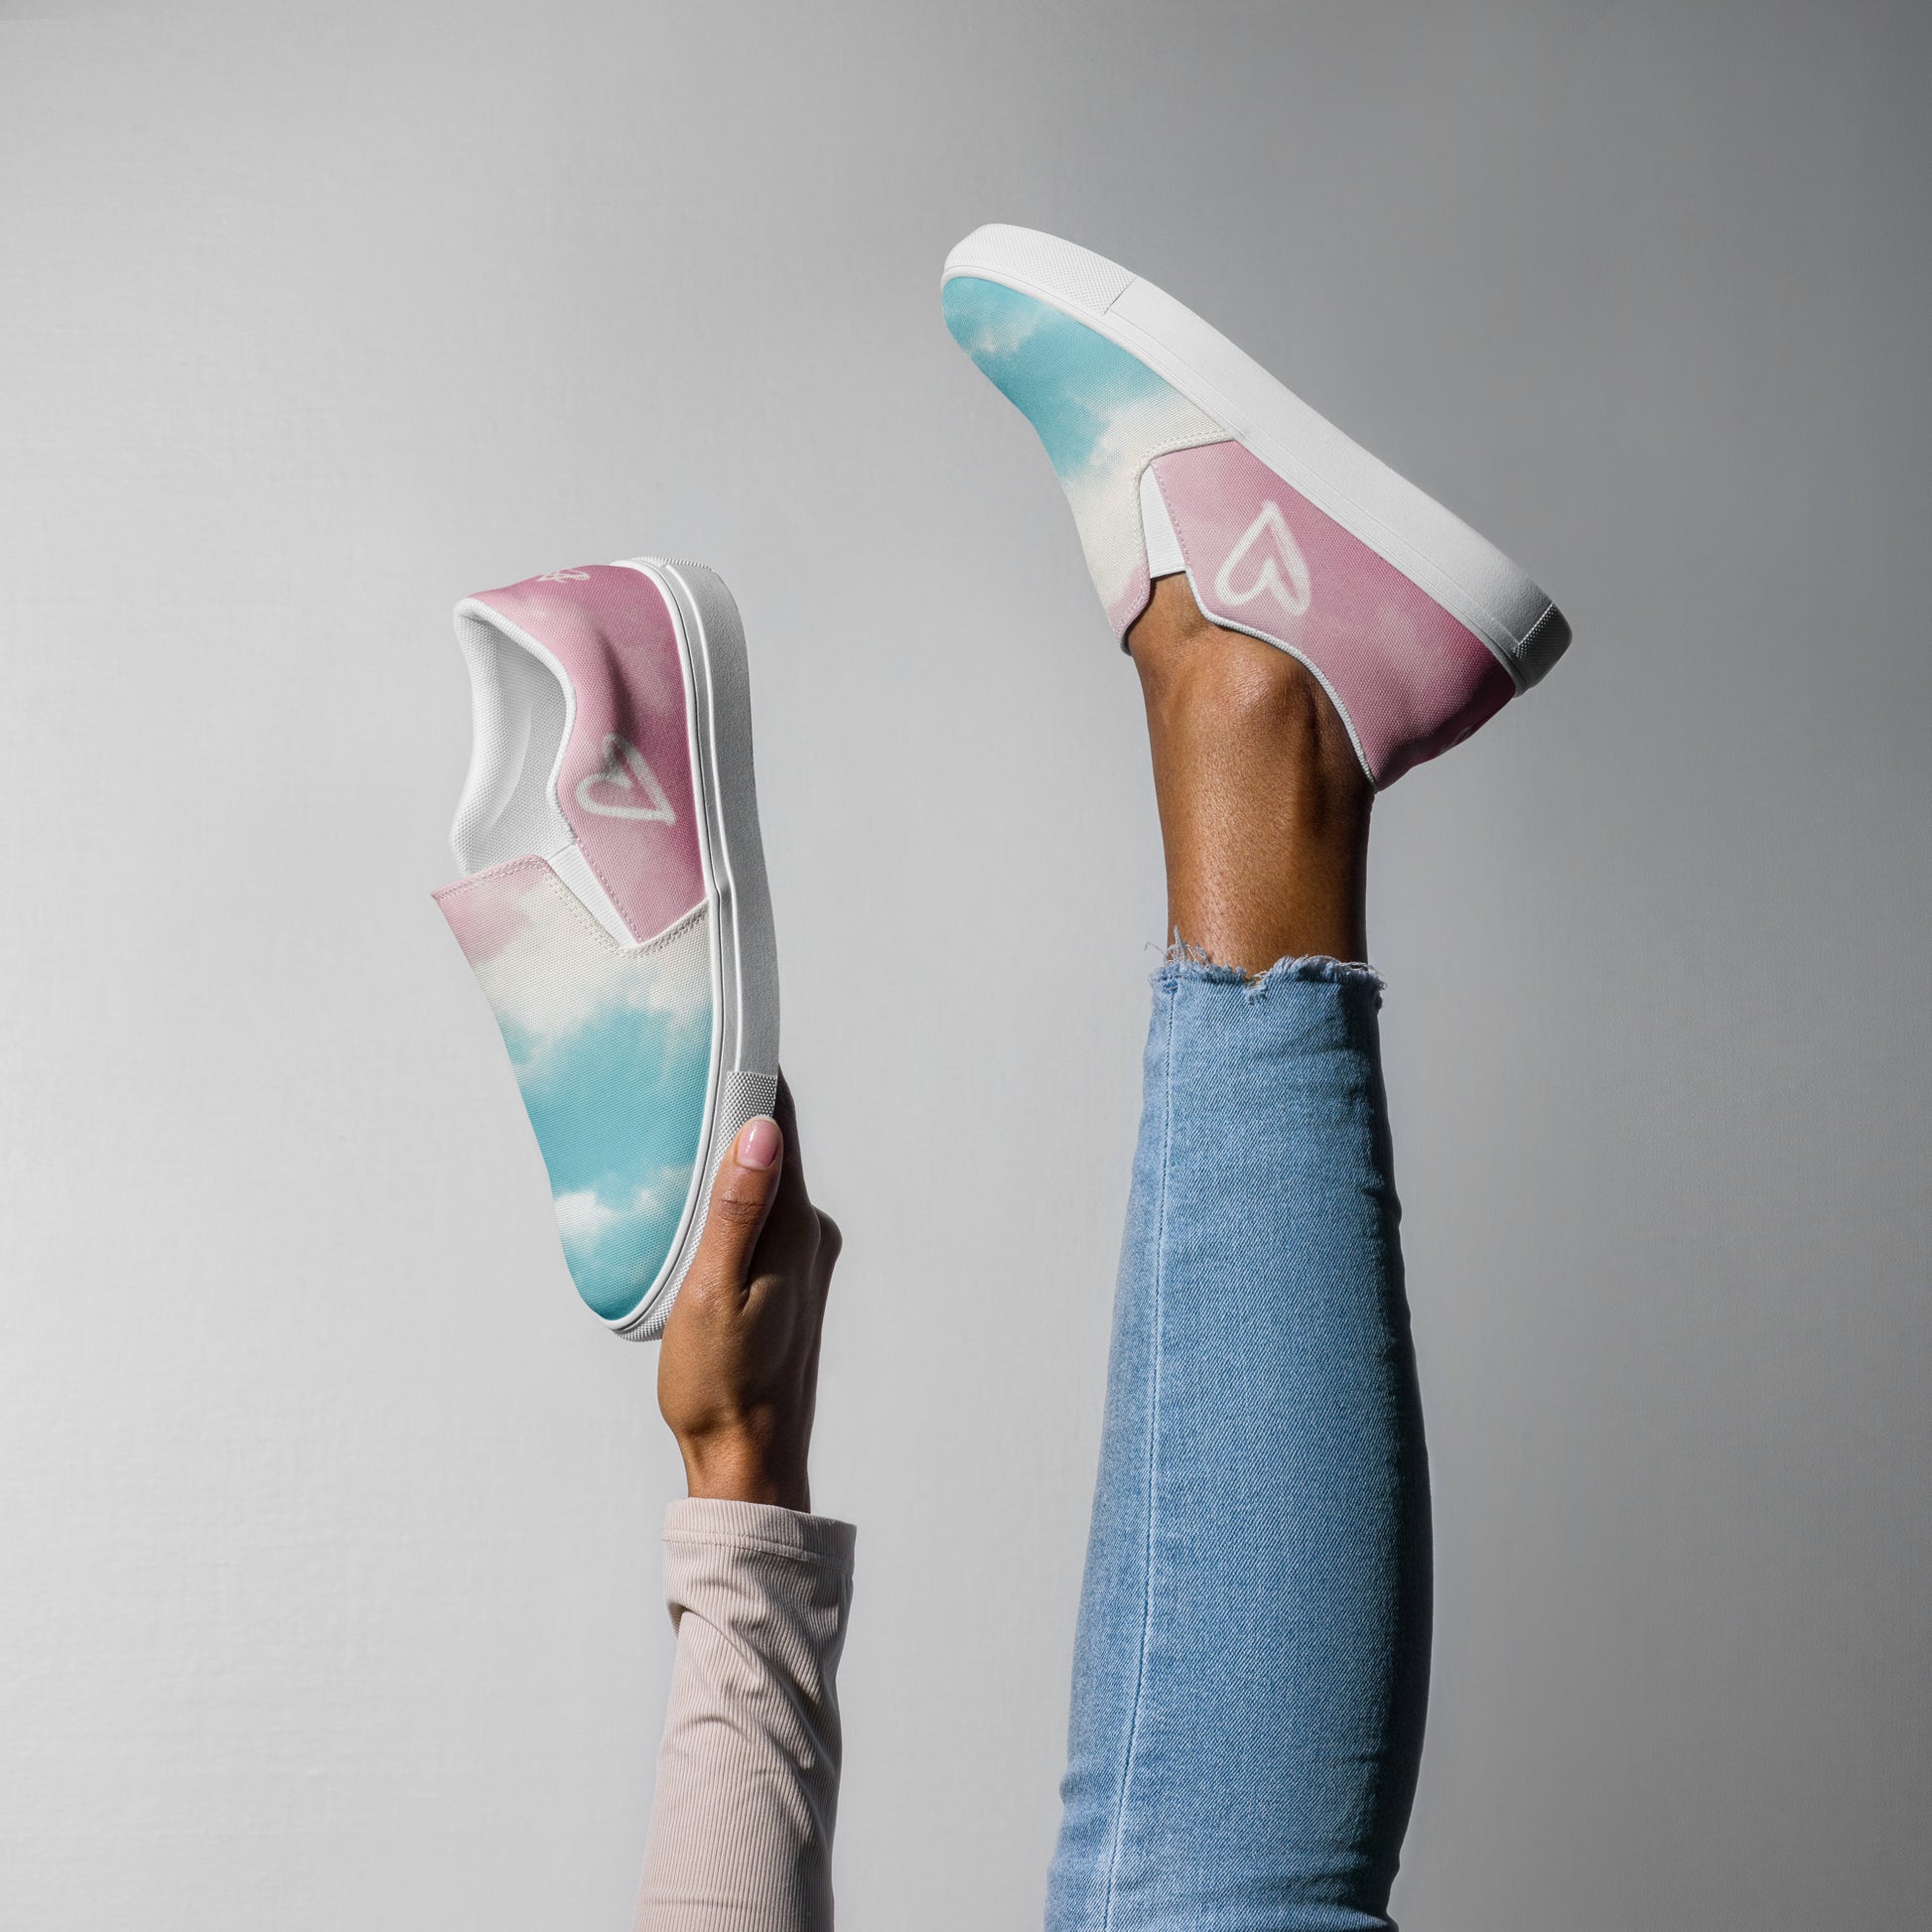 A model wears the Cloudy Transgender Pride flag slip on shoe on one foot and hold the match in the air for scale.